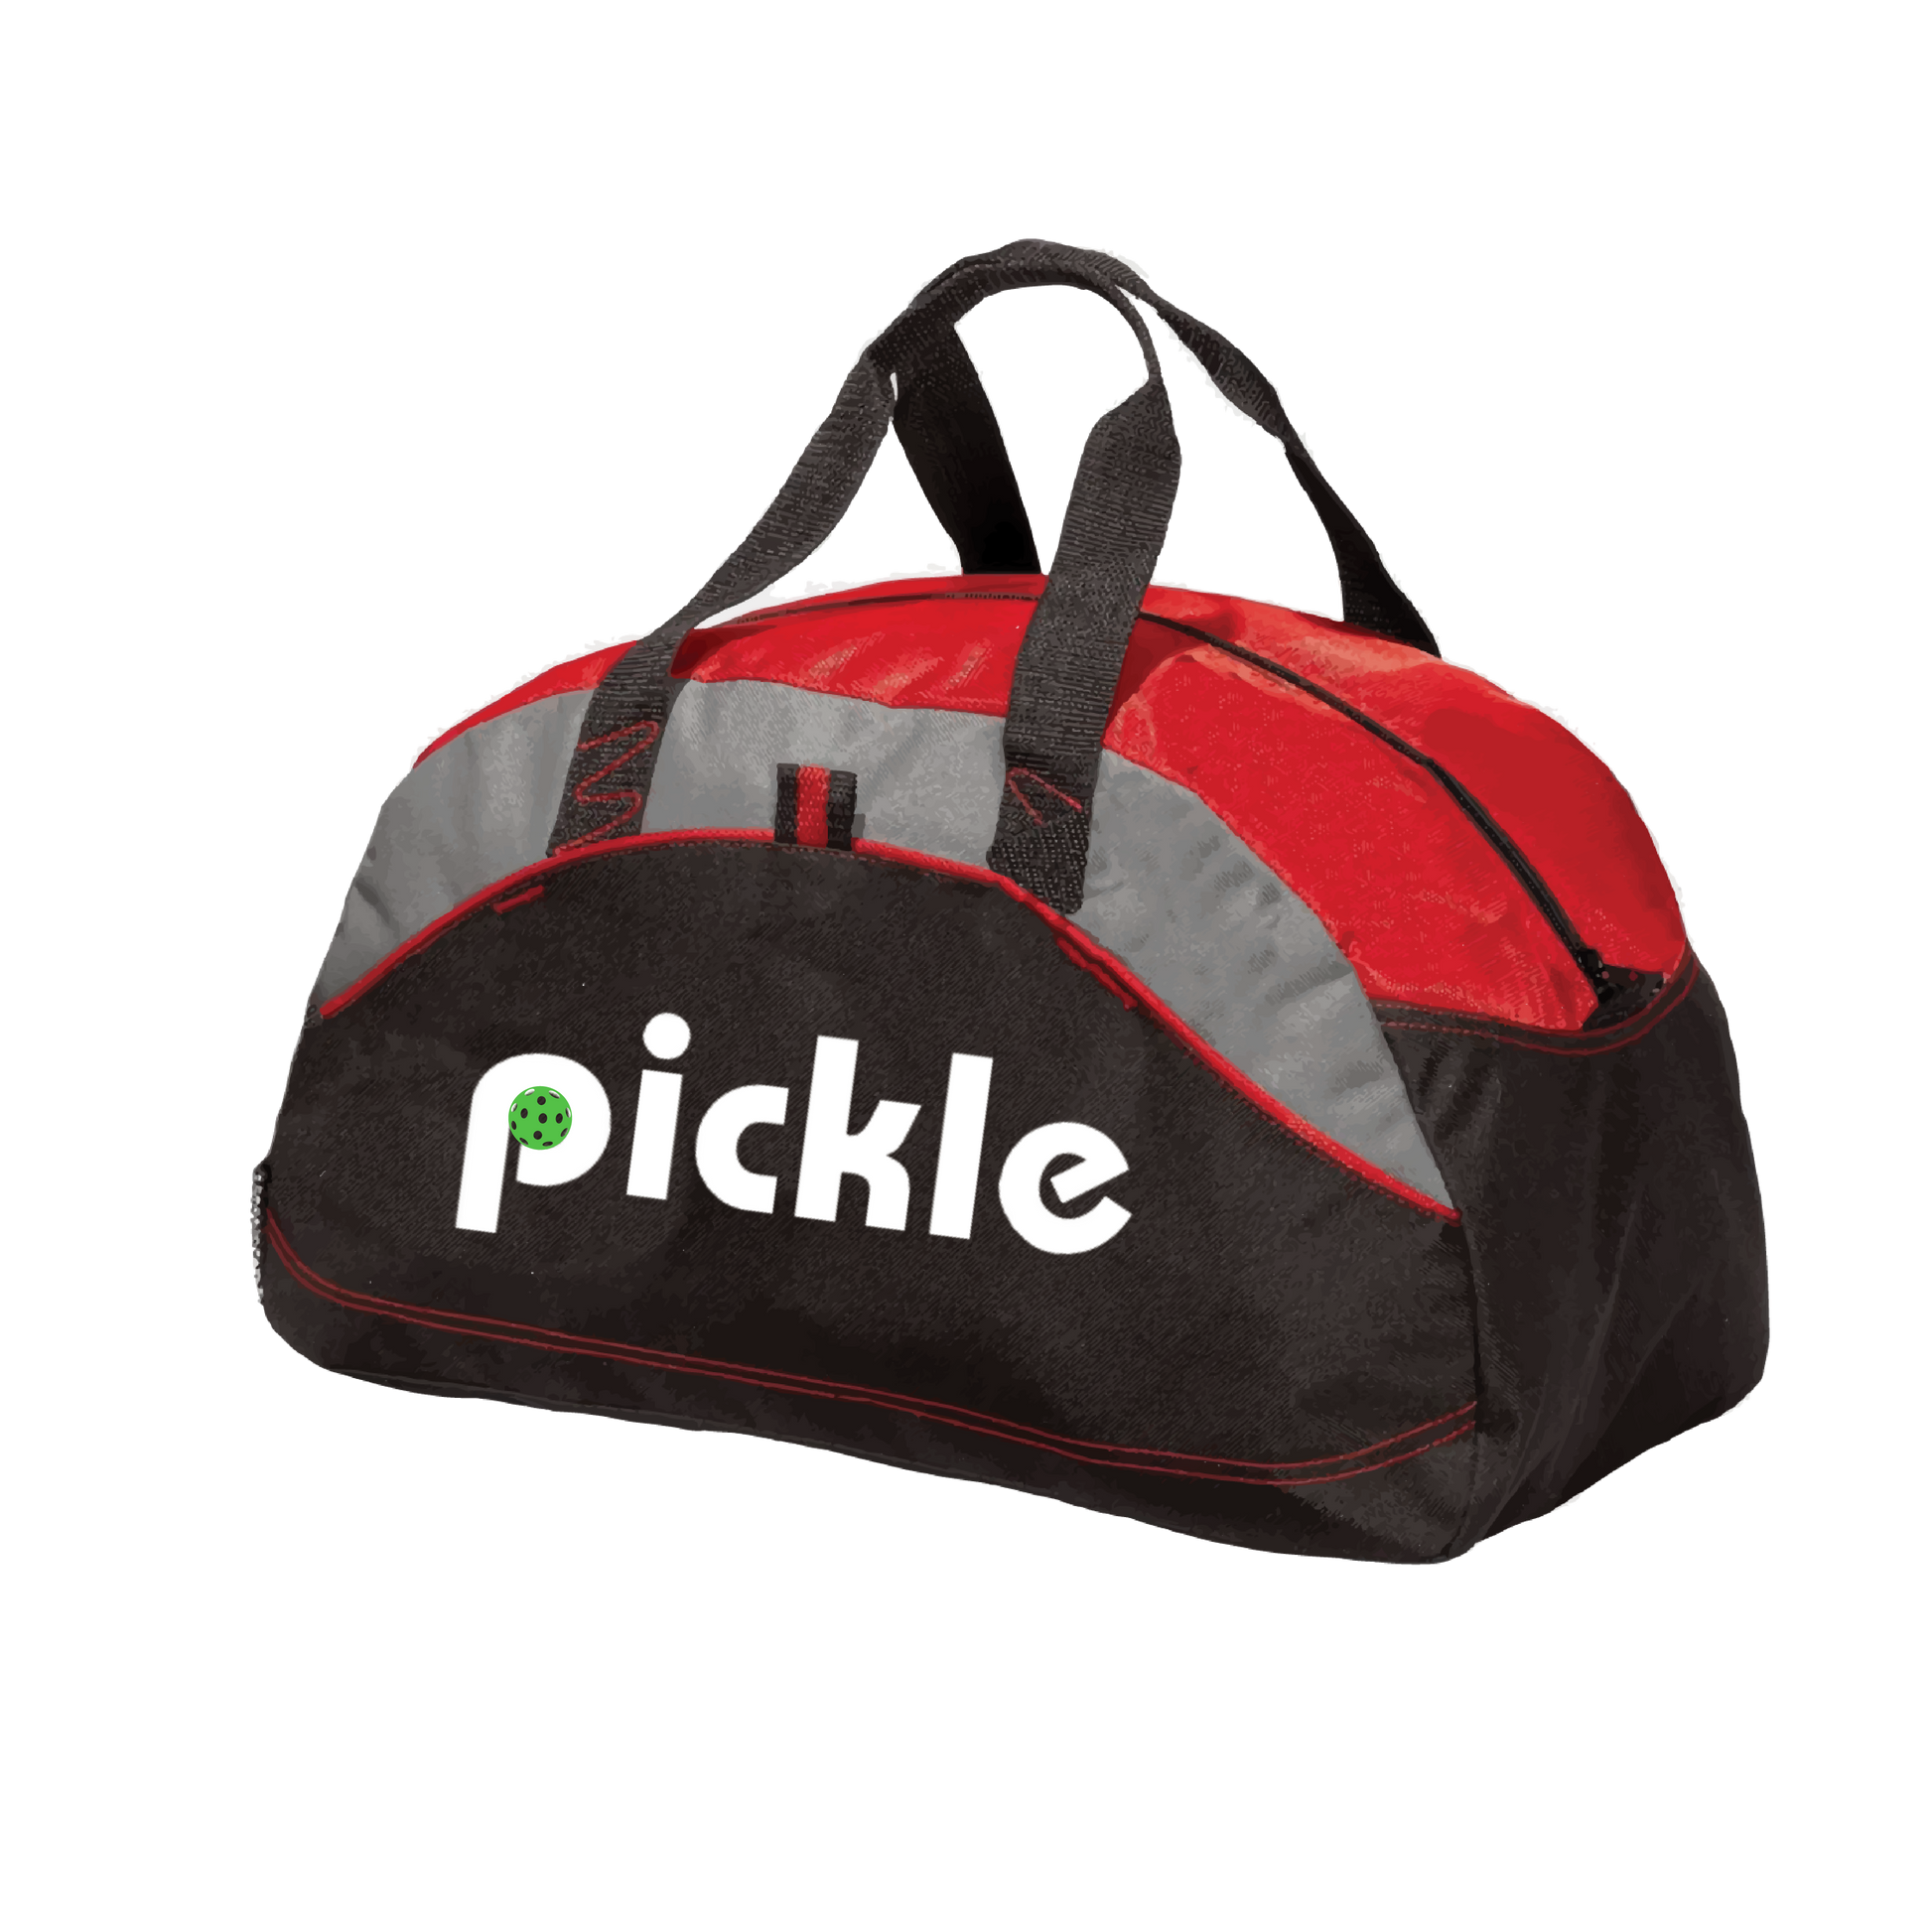 Carry your gear in comfort and style. This fun pickleball duffel bag is the perfect accessory for all pickleball players needing to keep their gear in one place. This medium sized duffel tote is ideal for all your pickleball activities. The large center compartment allows for plenty of space and the mesh end pocket is perfect for holding a water bottle. Duffel bag comes with an adjustable shoulder strap and the polyester material is durable and easily cleaned.